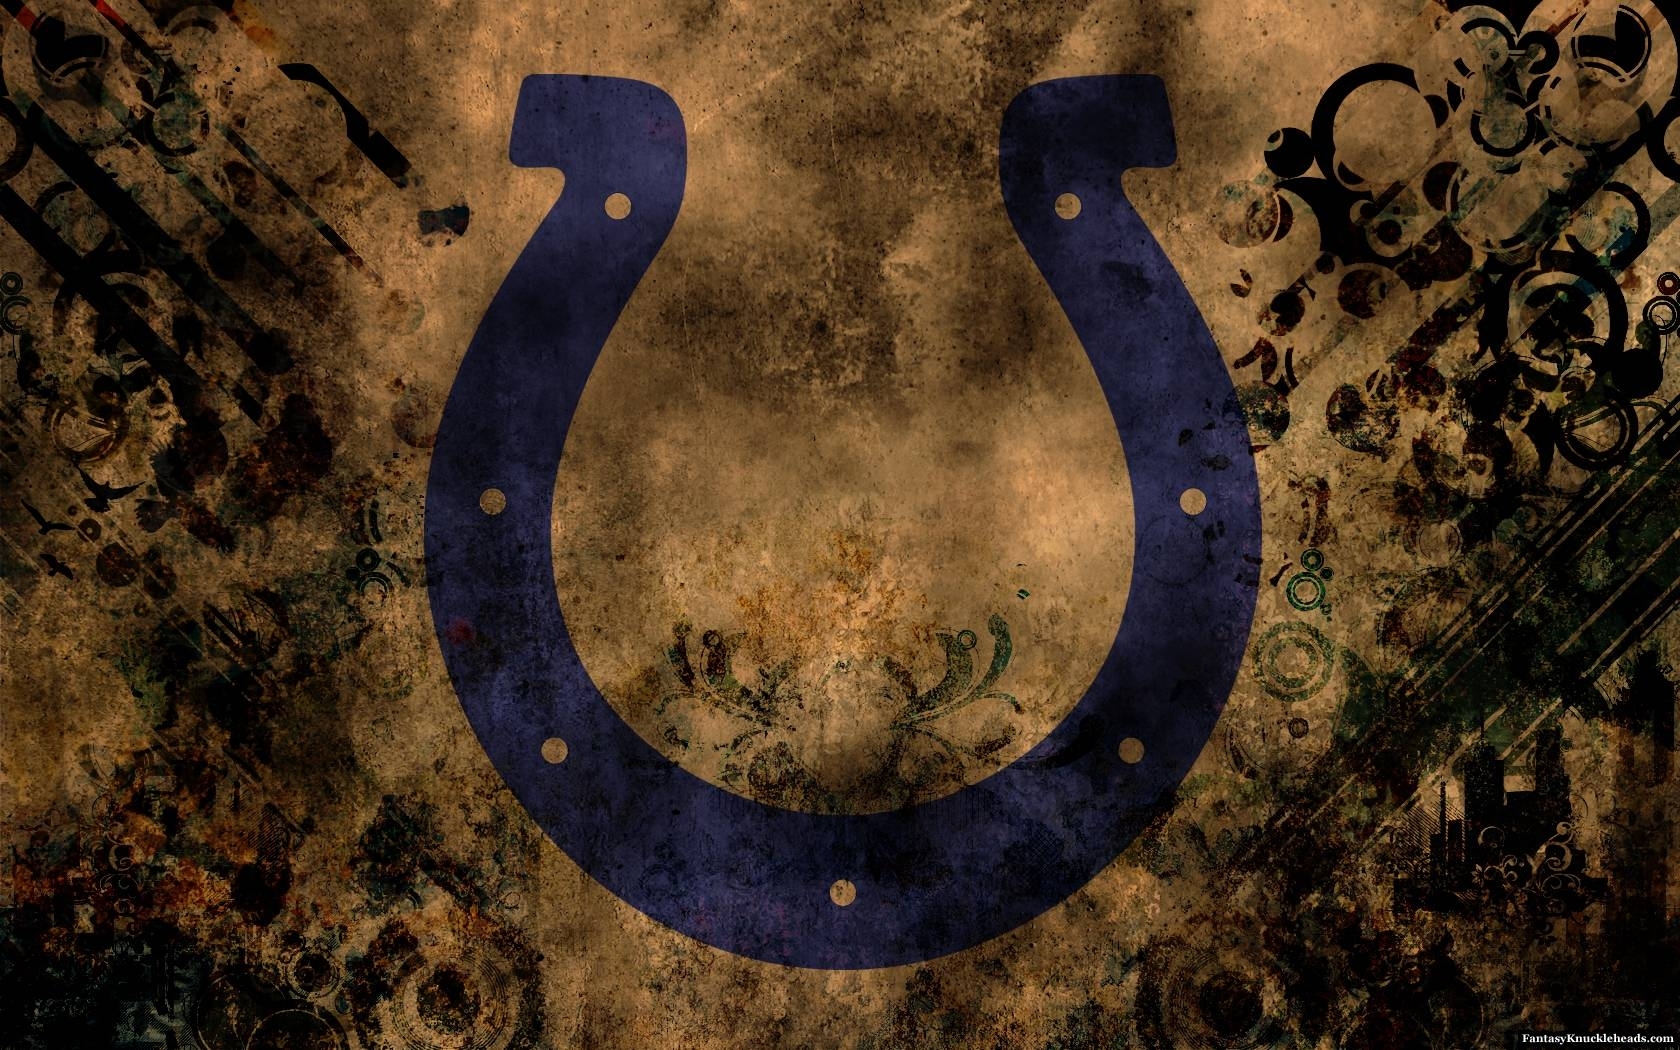 Best Indianapolis Colts Desktop Wallpaper FULL HD 1080p For PC